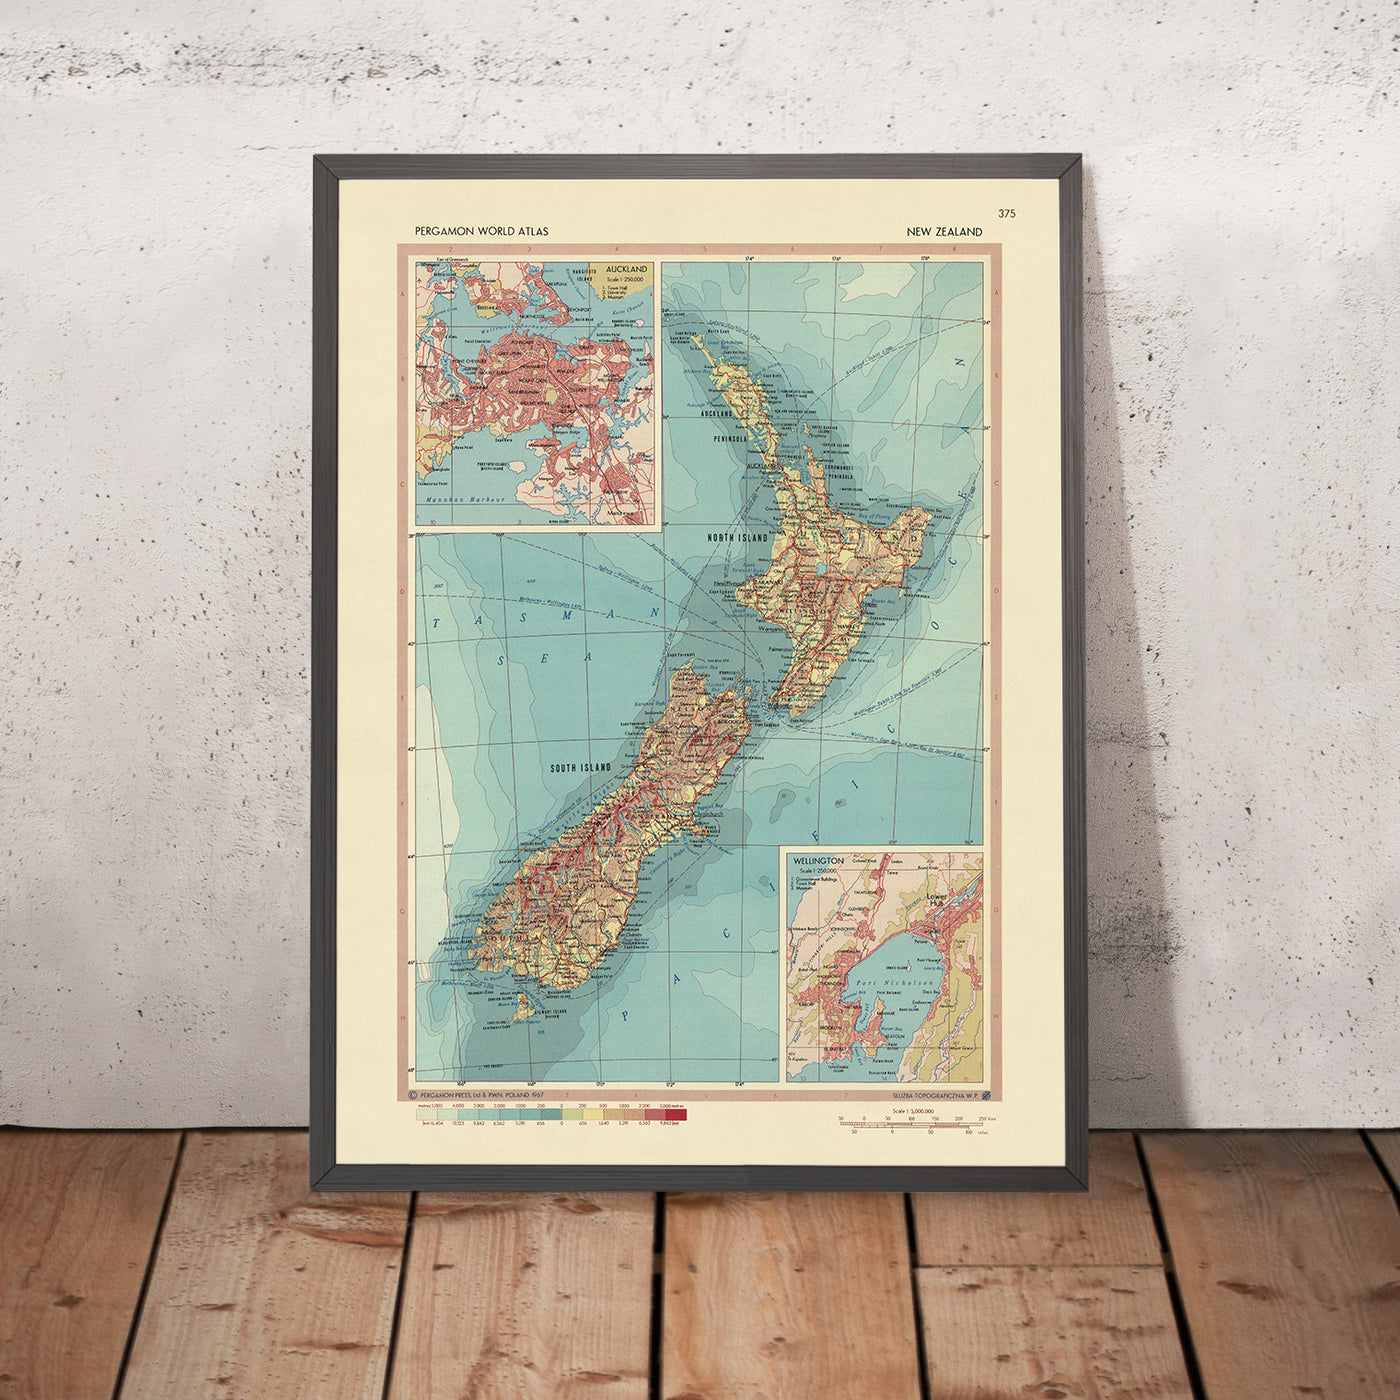 Old Map of New Zealand, 1967: Auckland, Wellington, North Island, South Island, Cook Strait